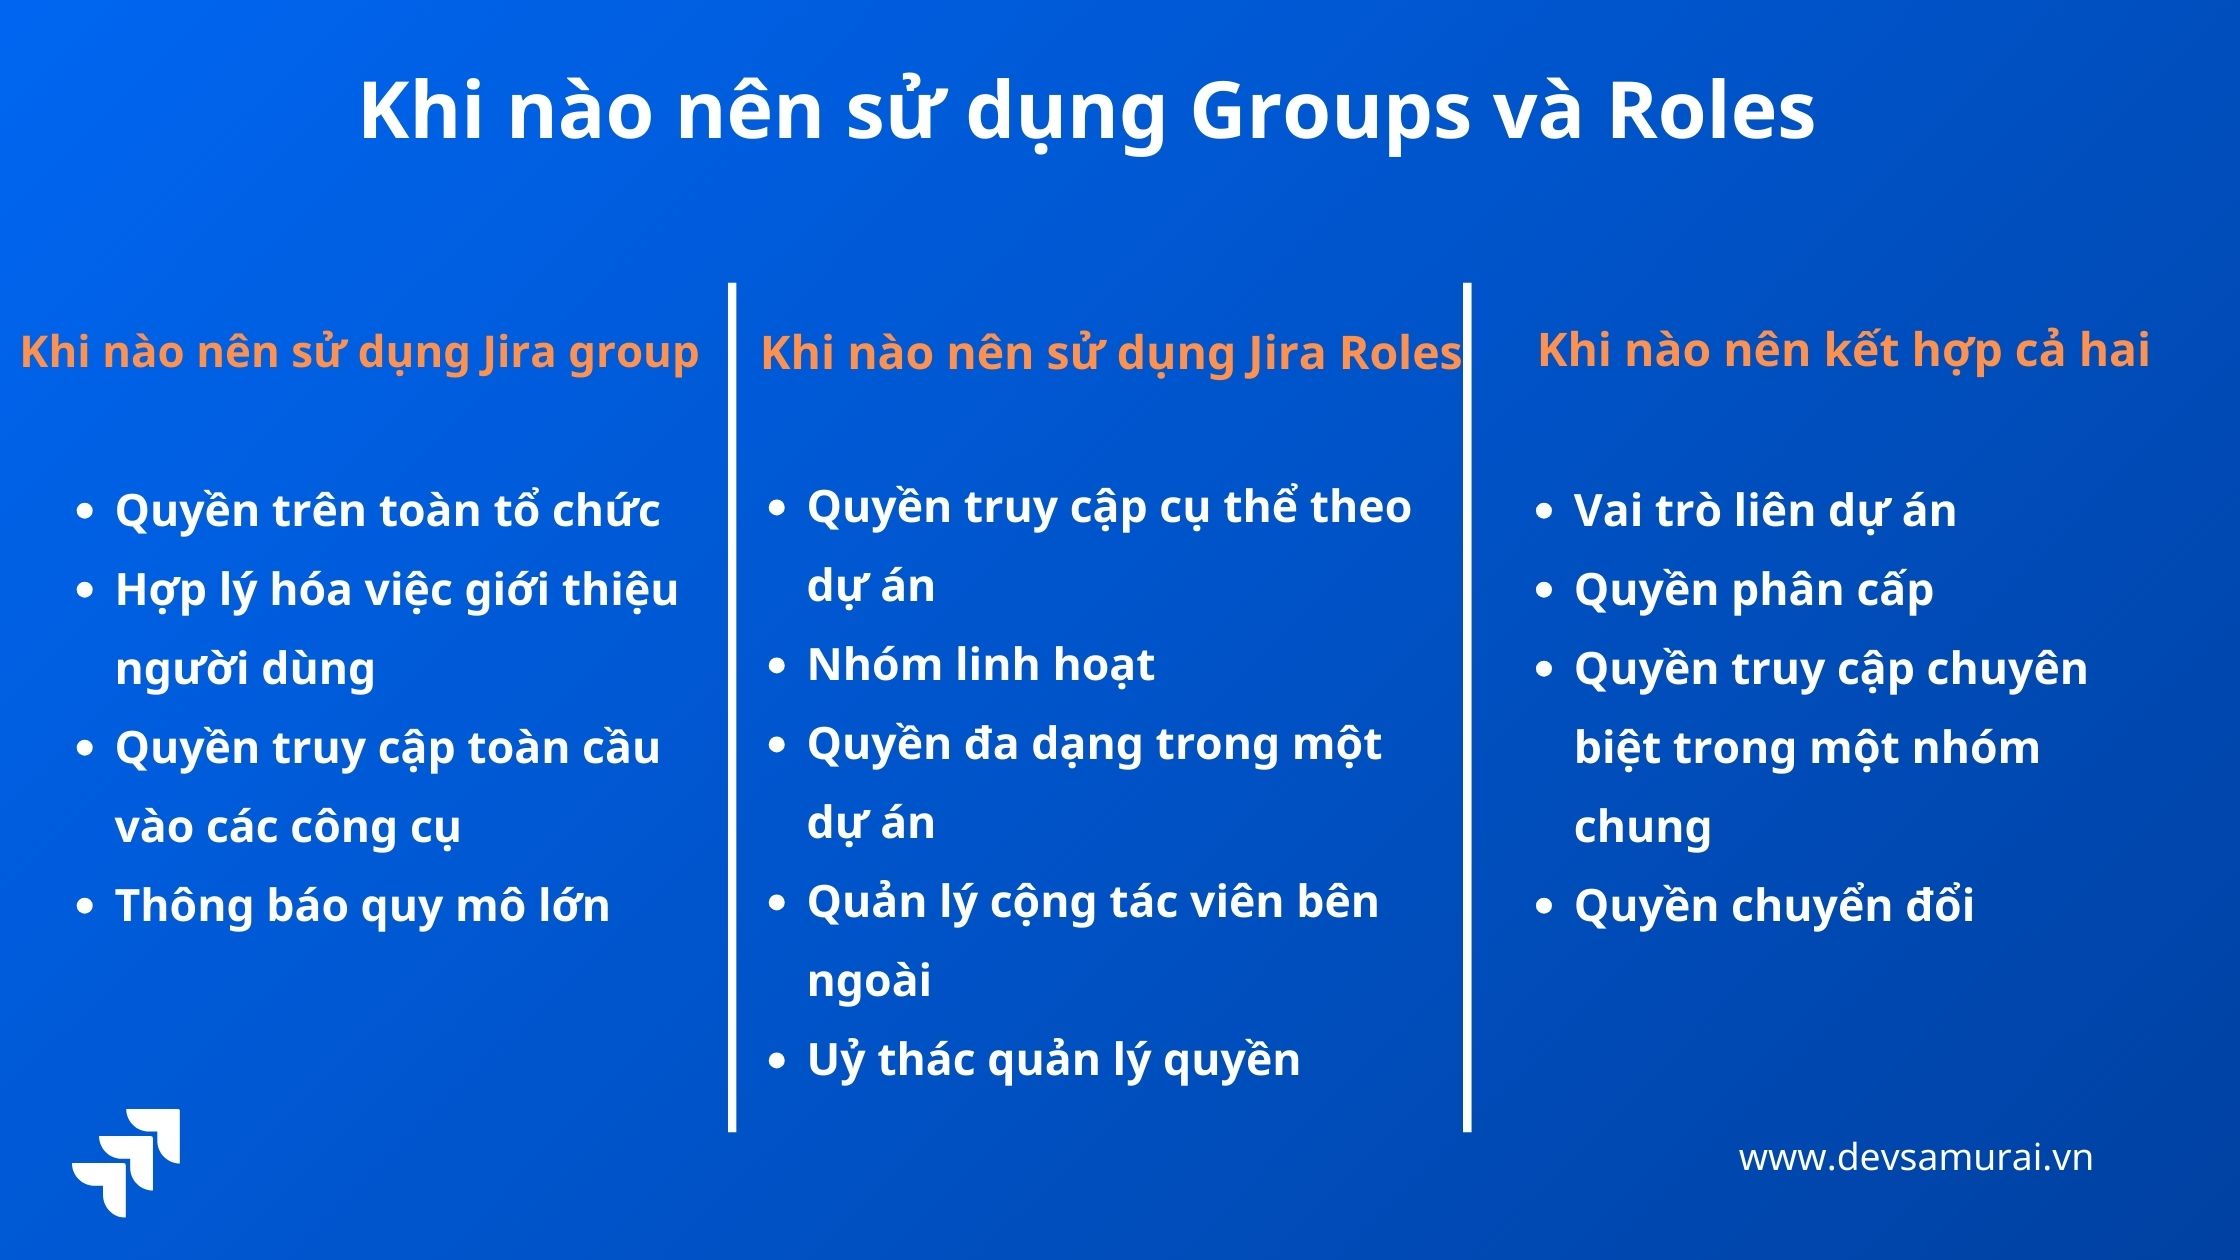 When to Use Groups vs. Roles